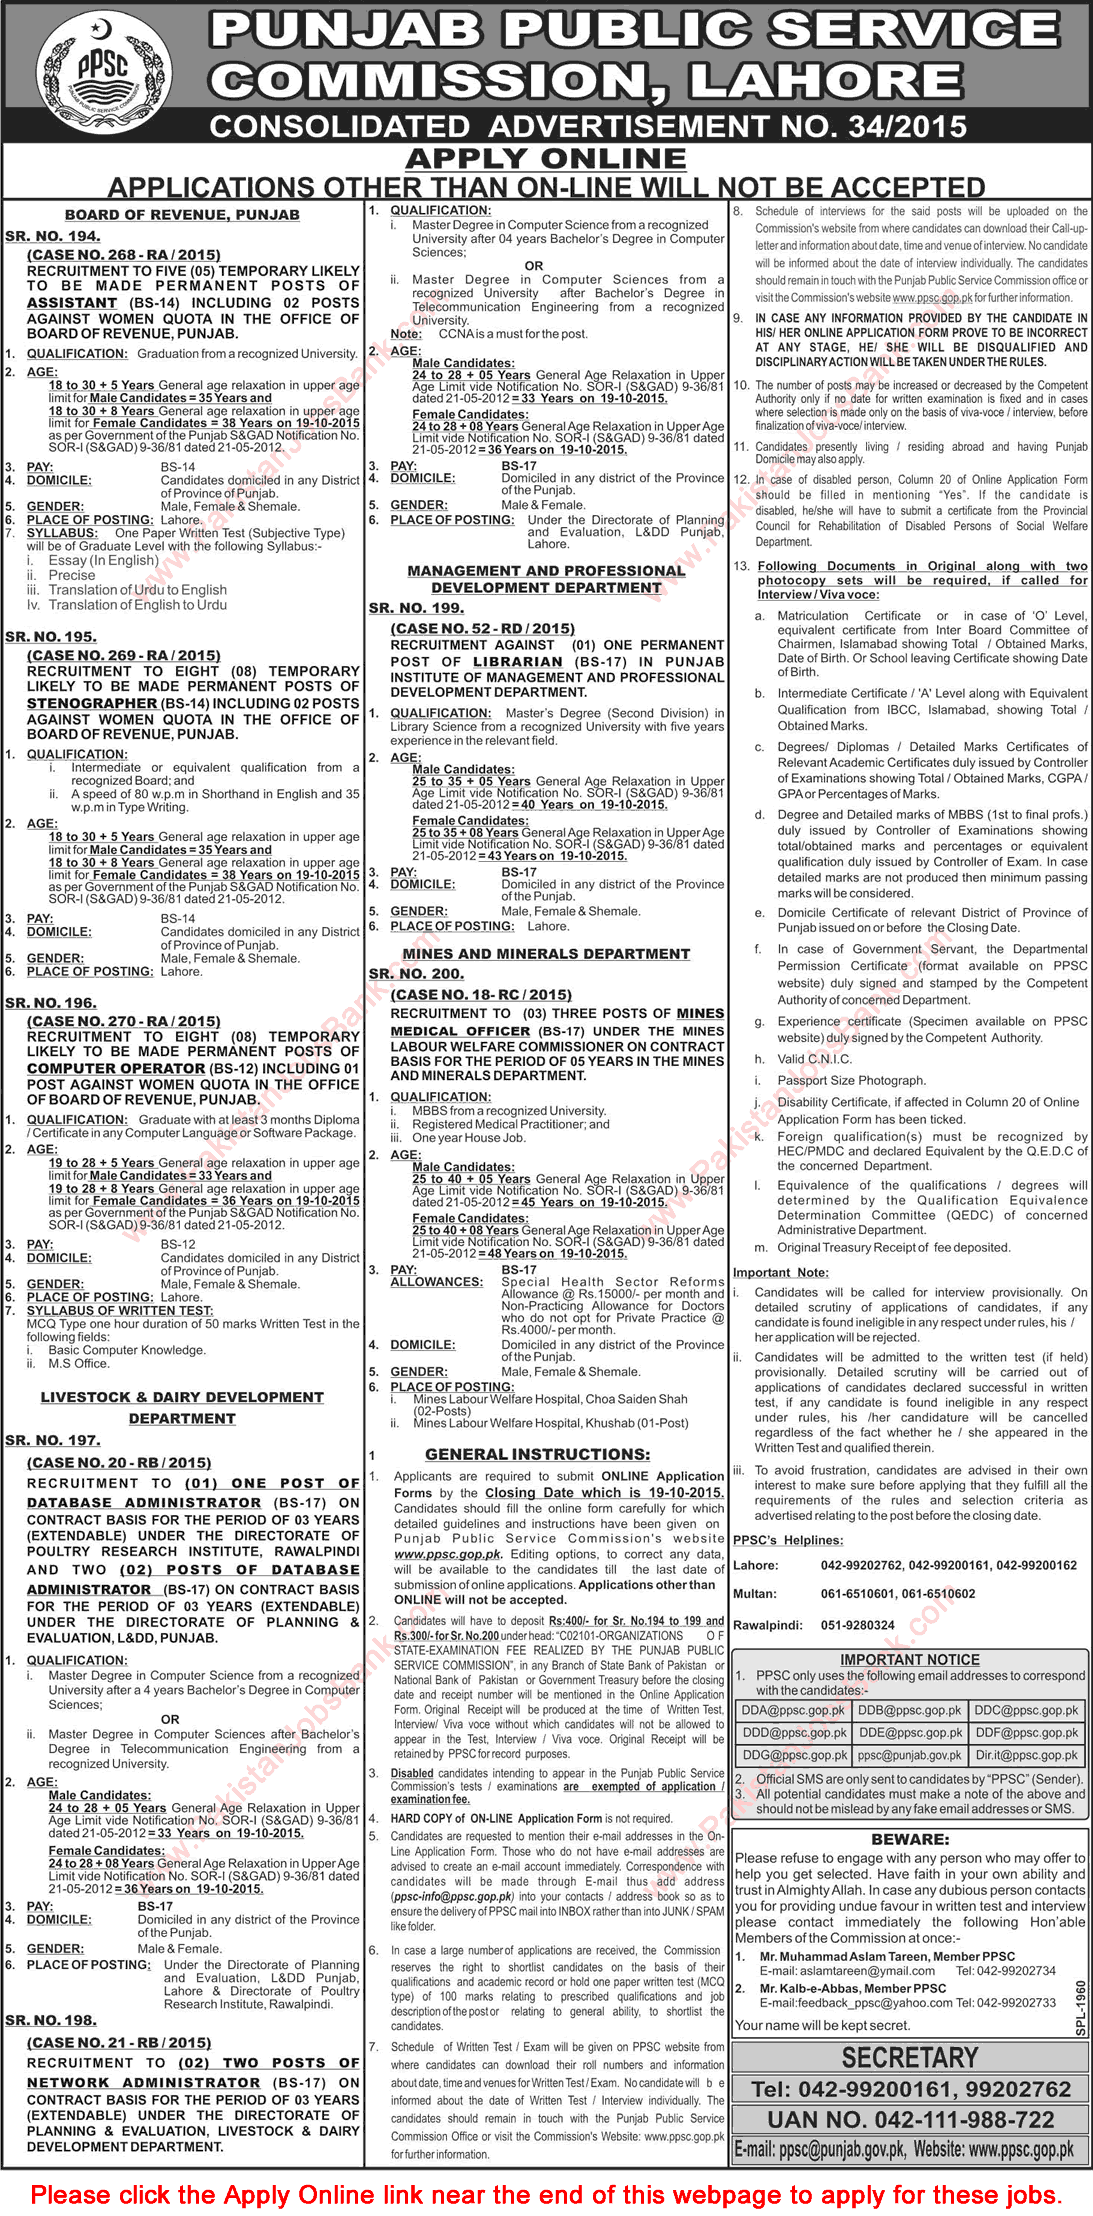 PPSC Jobs October 2015 Consolidated Advertisement No. 34/2015 Apply Online New